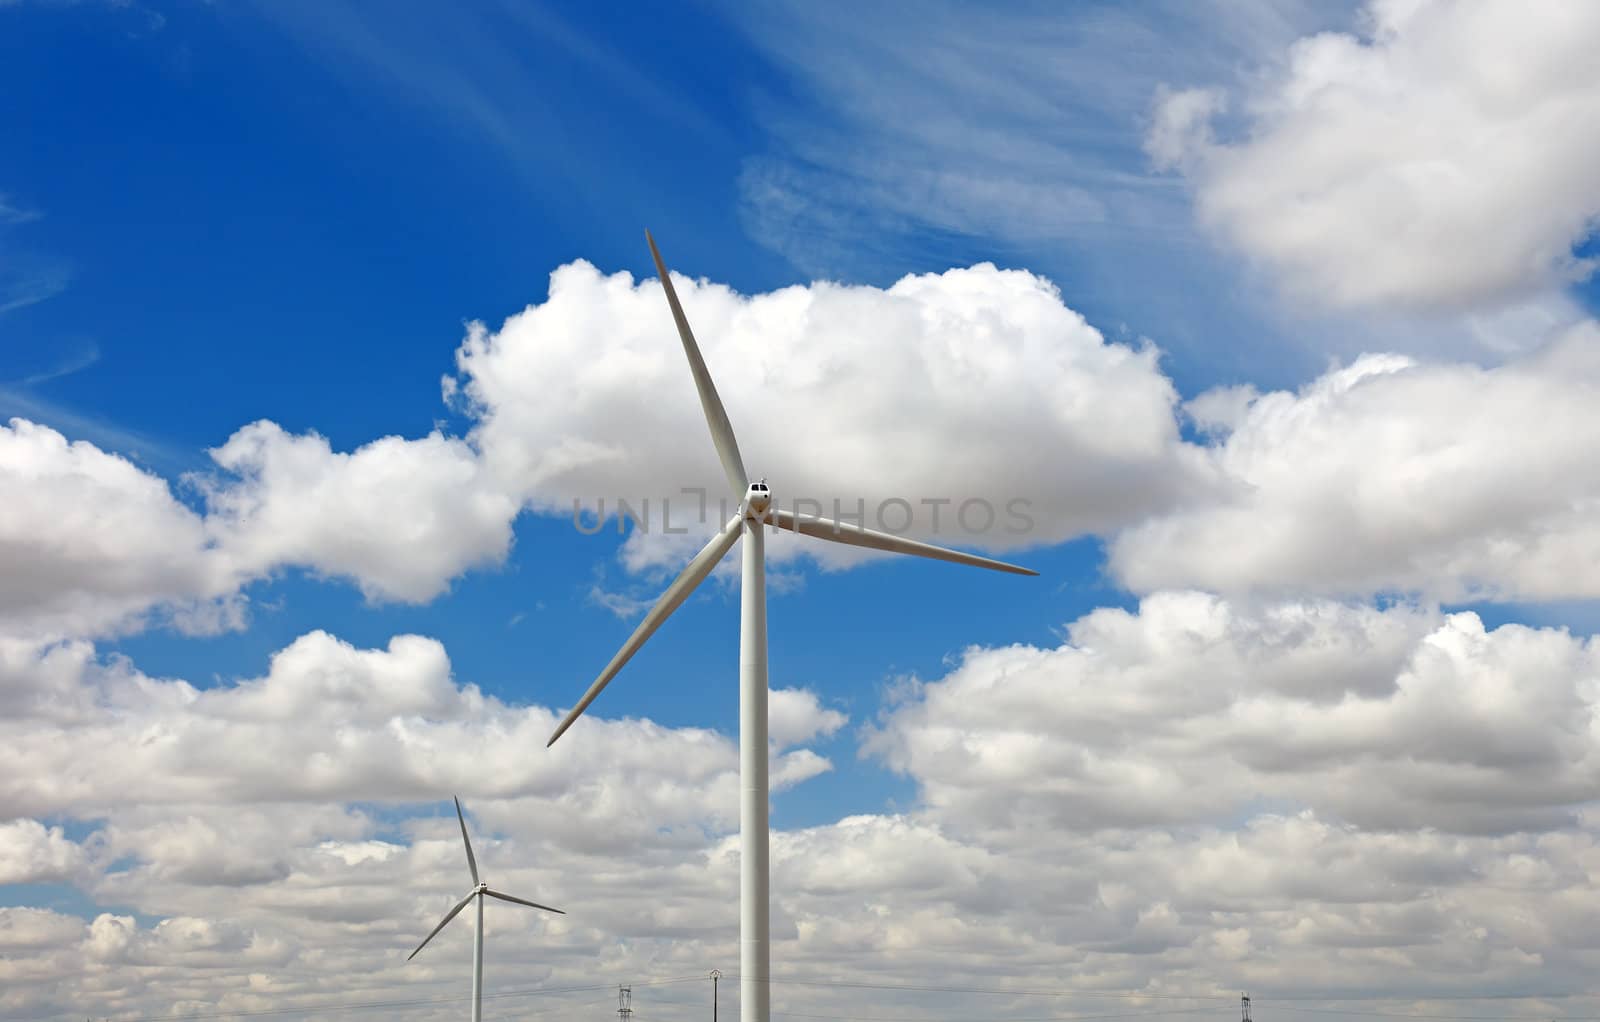 Wind power generator and blue sky, France, Europe.